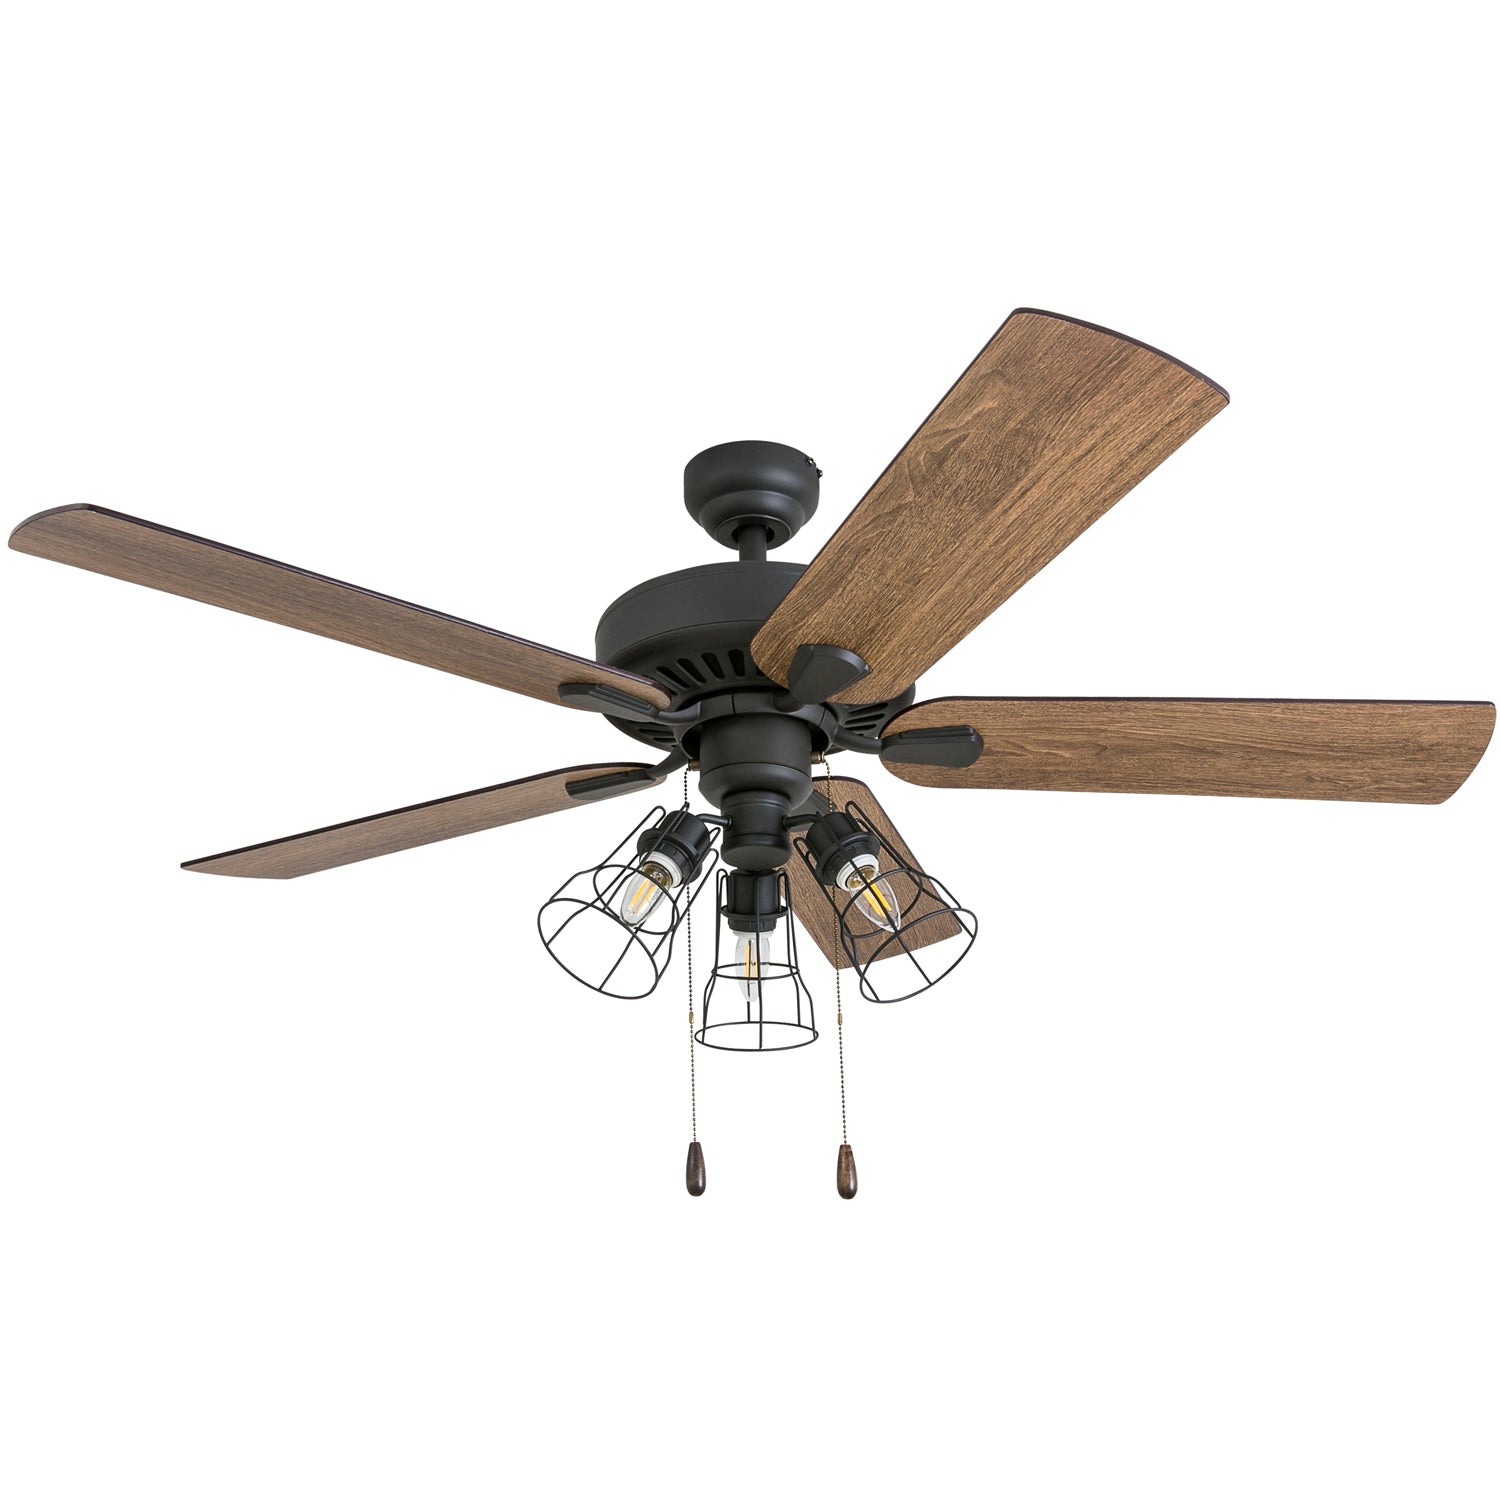 52 Inch Inland Seas, Bronze, Pull Chain, Ceiling Fan by Prominence Home